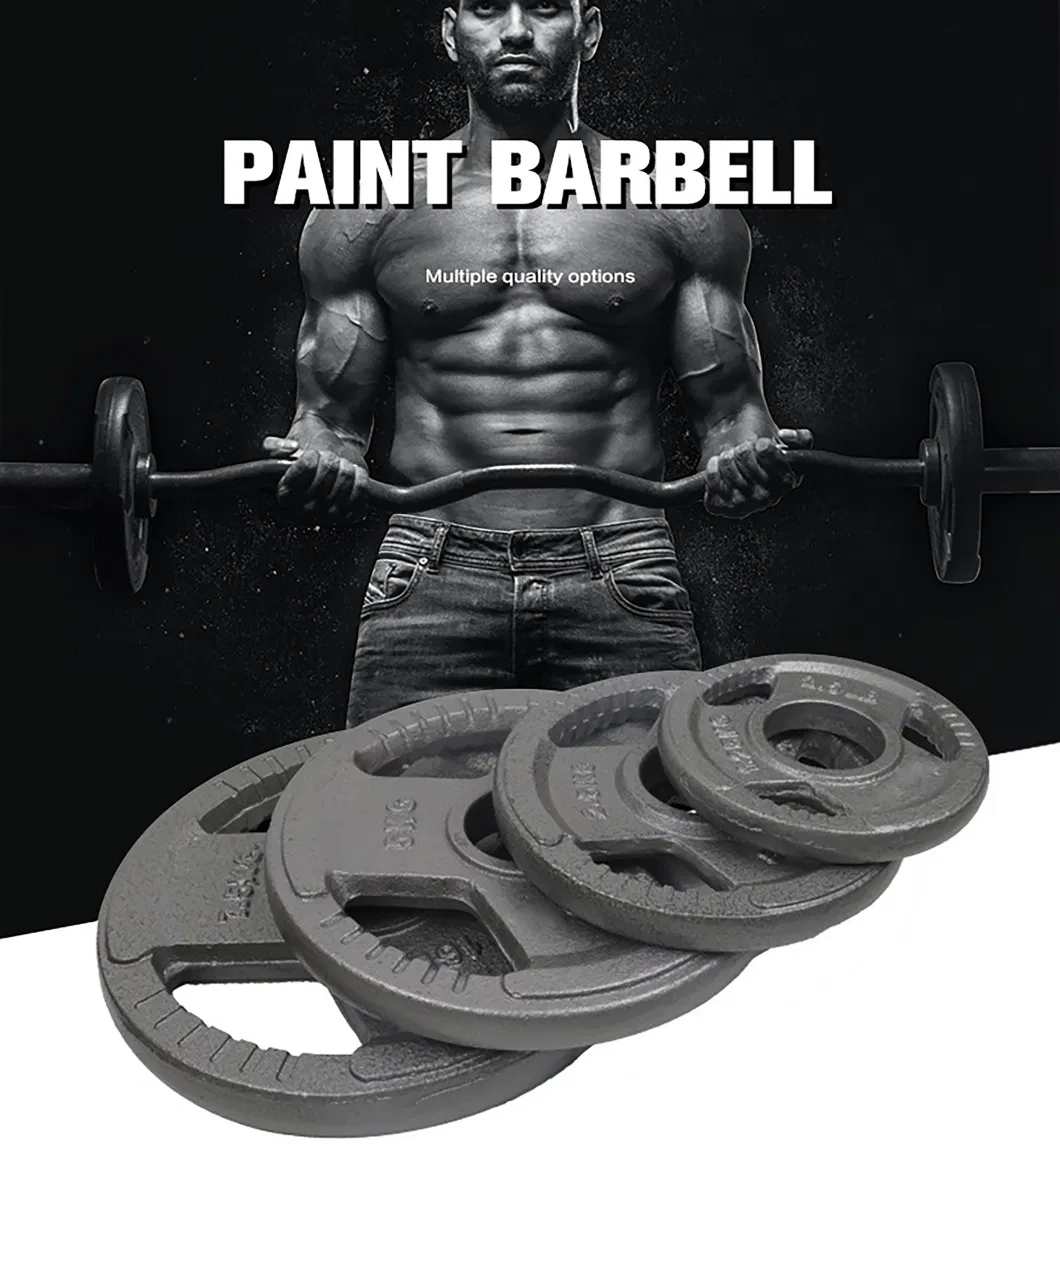 Best Price 2-Inch Standard Cast Iron Grip Weight Plates Fitness Equipment Barbell Plate for Strength Training